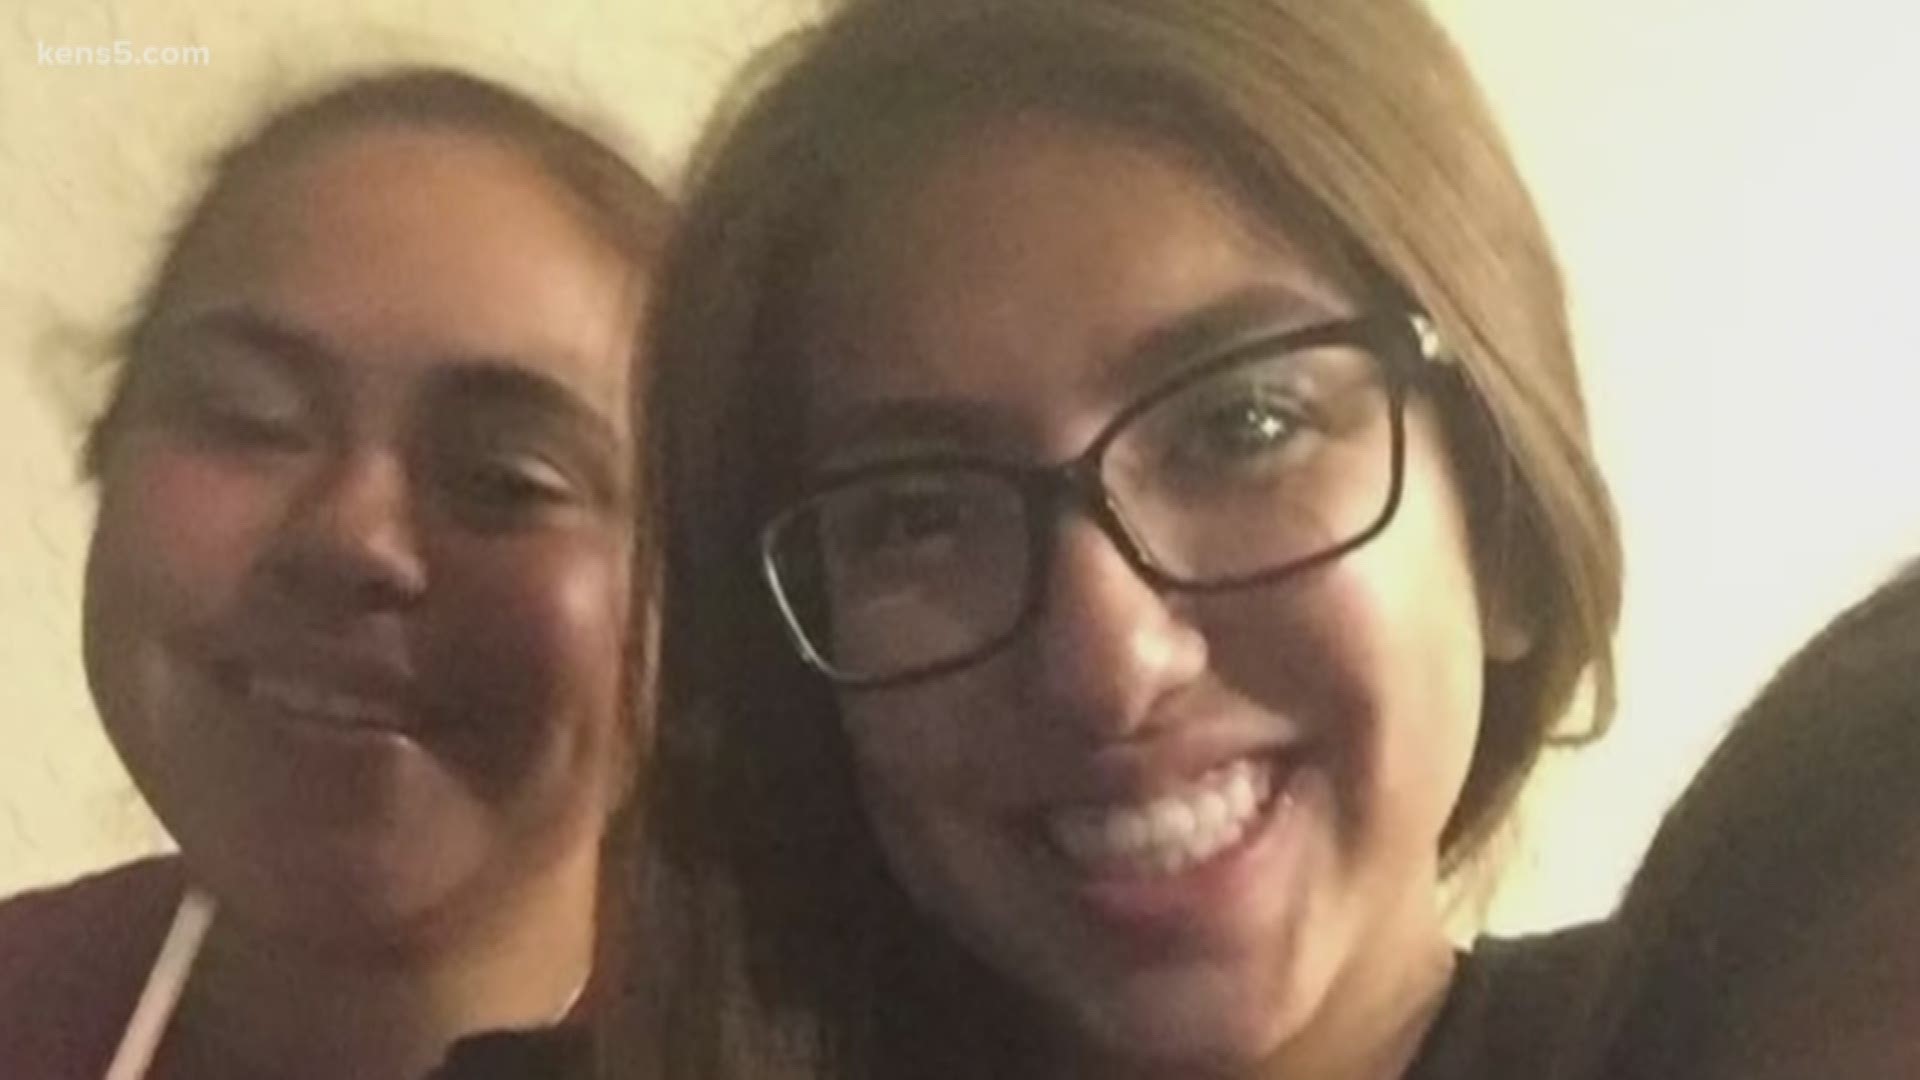 Two Highlands High School students are dead following a tragic murder-suicide incident on Wednesday in southeast San Antonio.